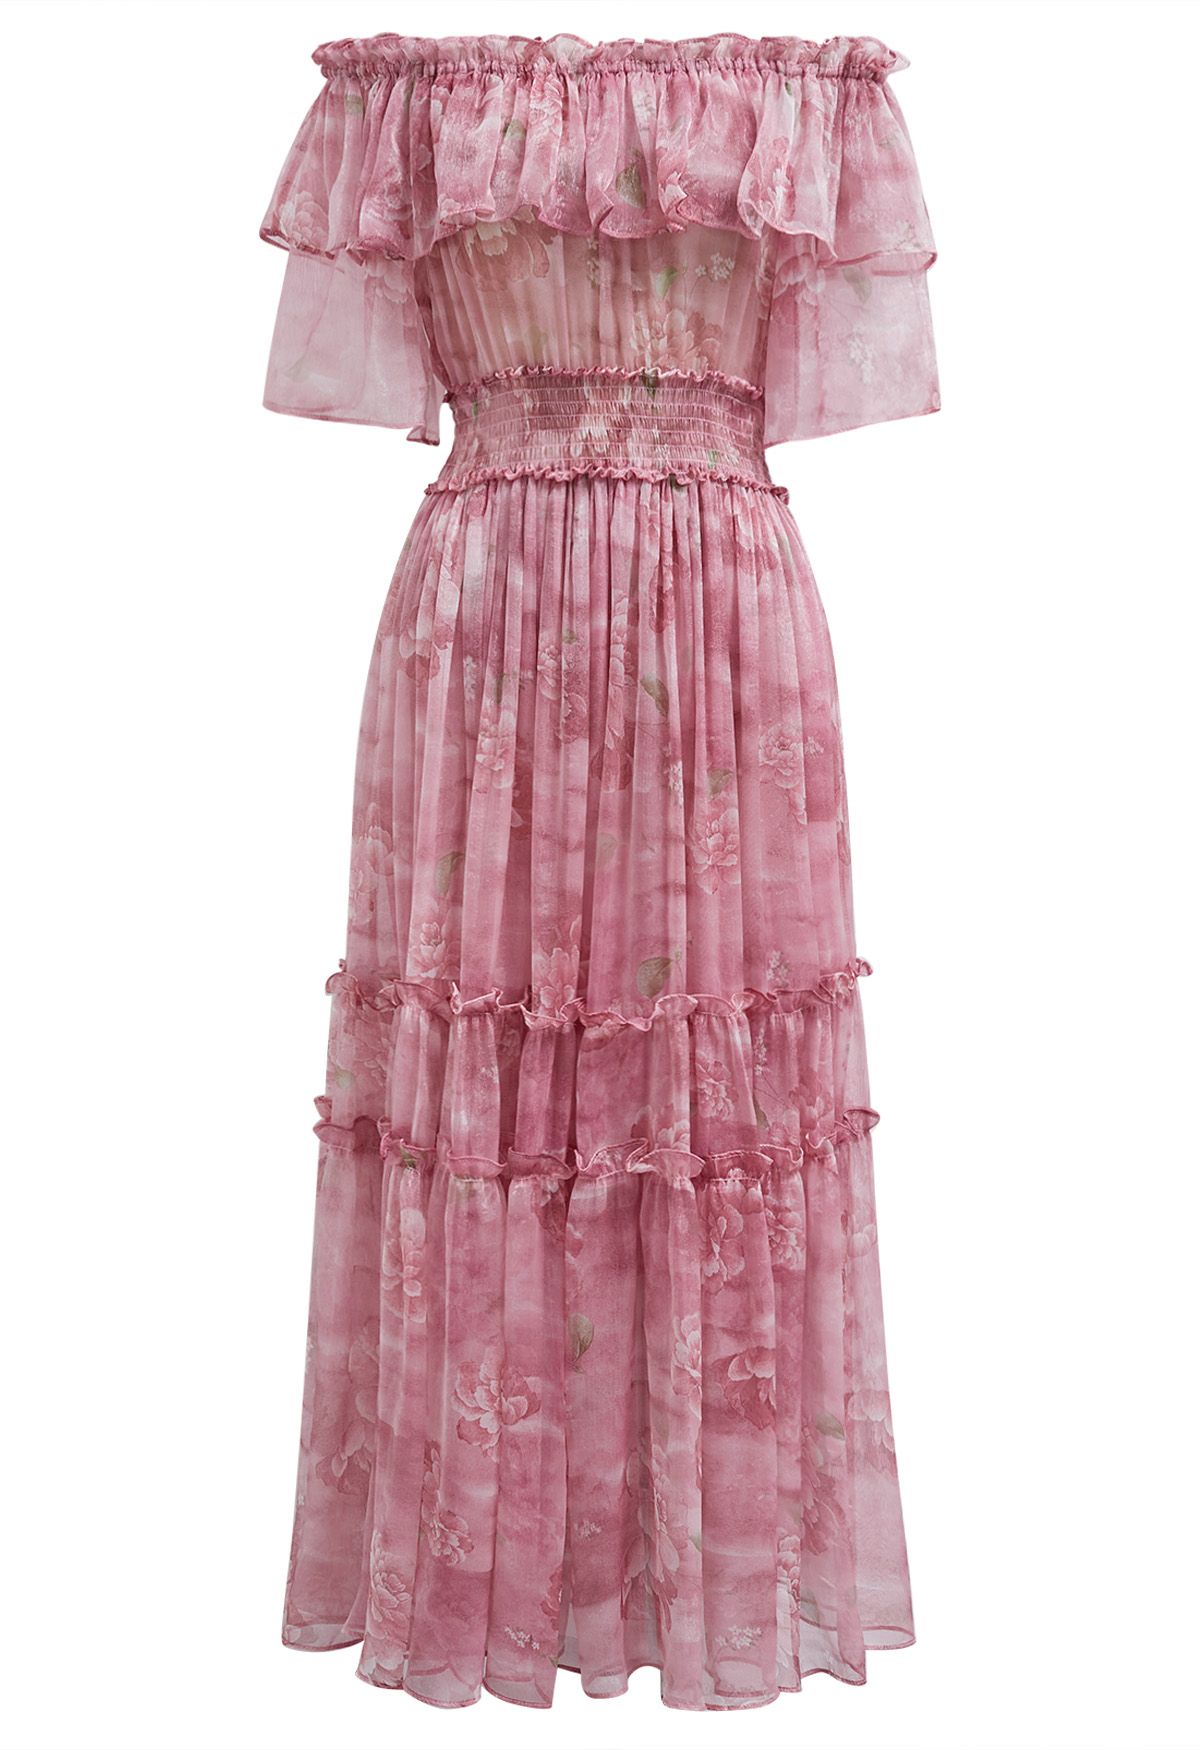 Summer Days Floral Off-Shoulder Ruffle Tiers Chiffon Dress in Pink